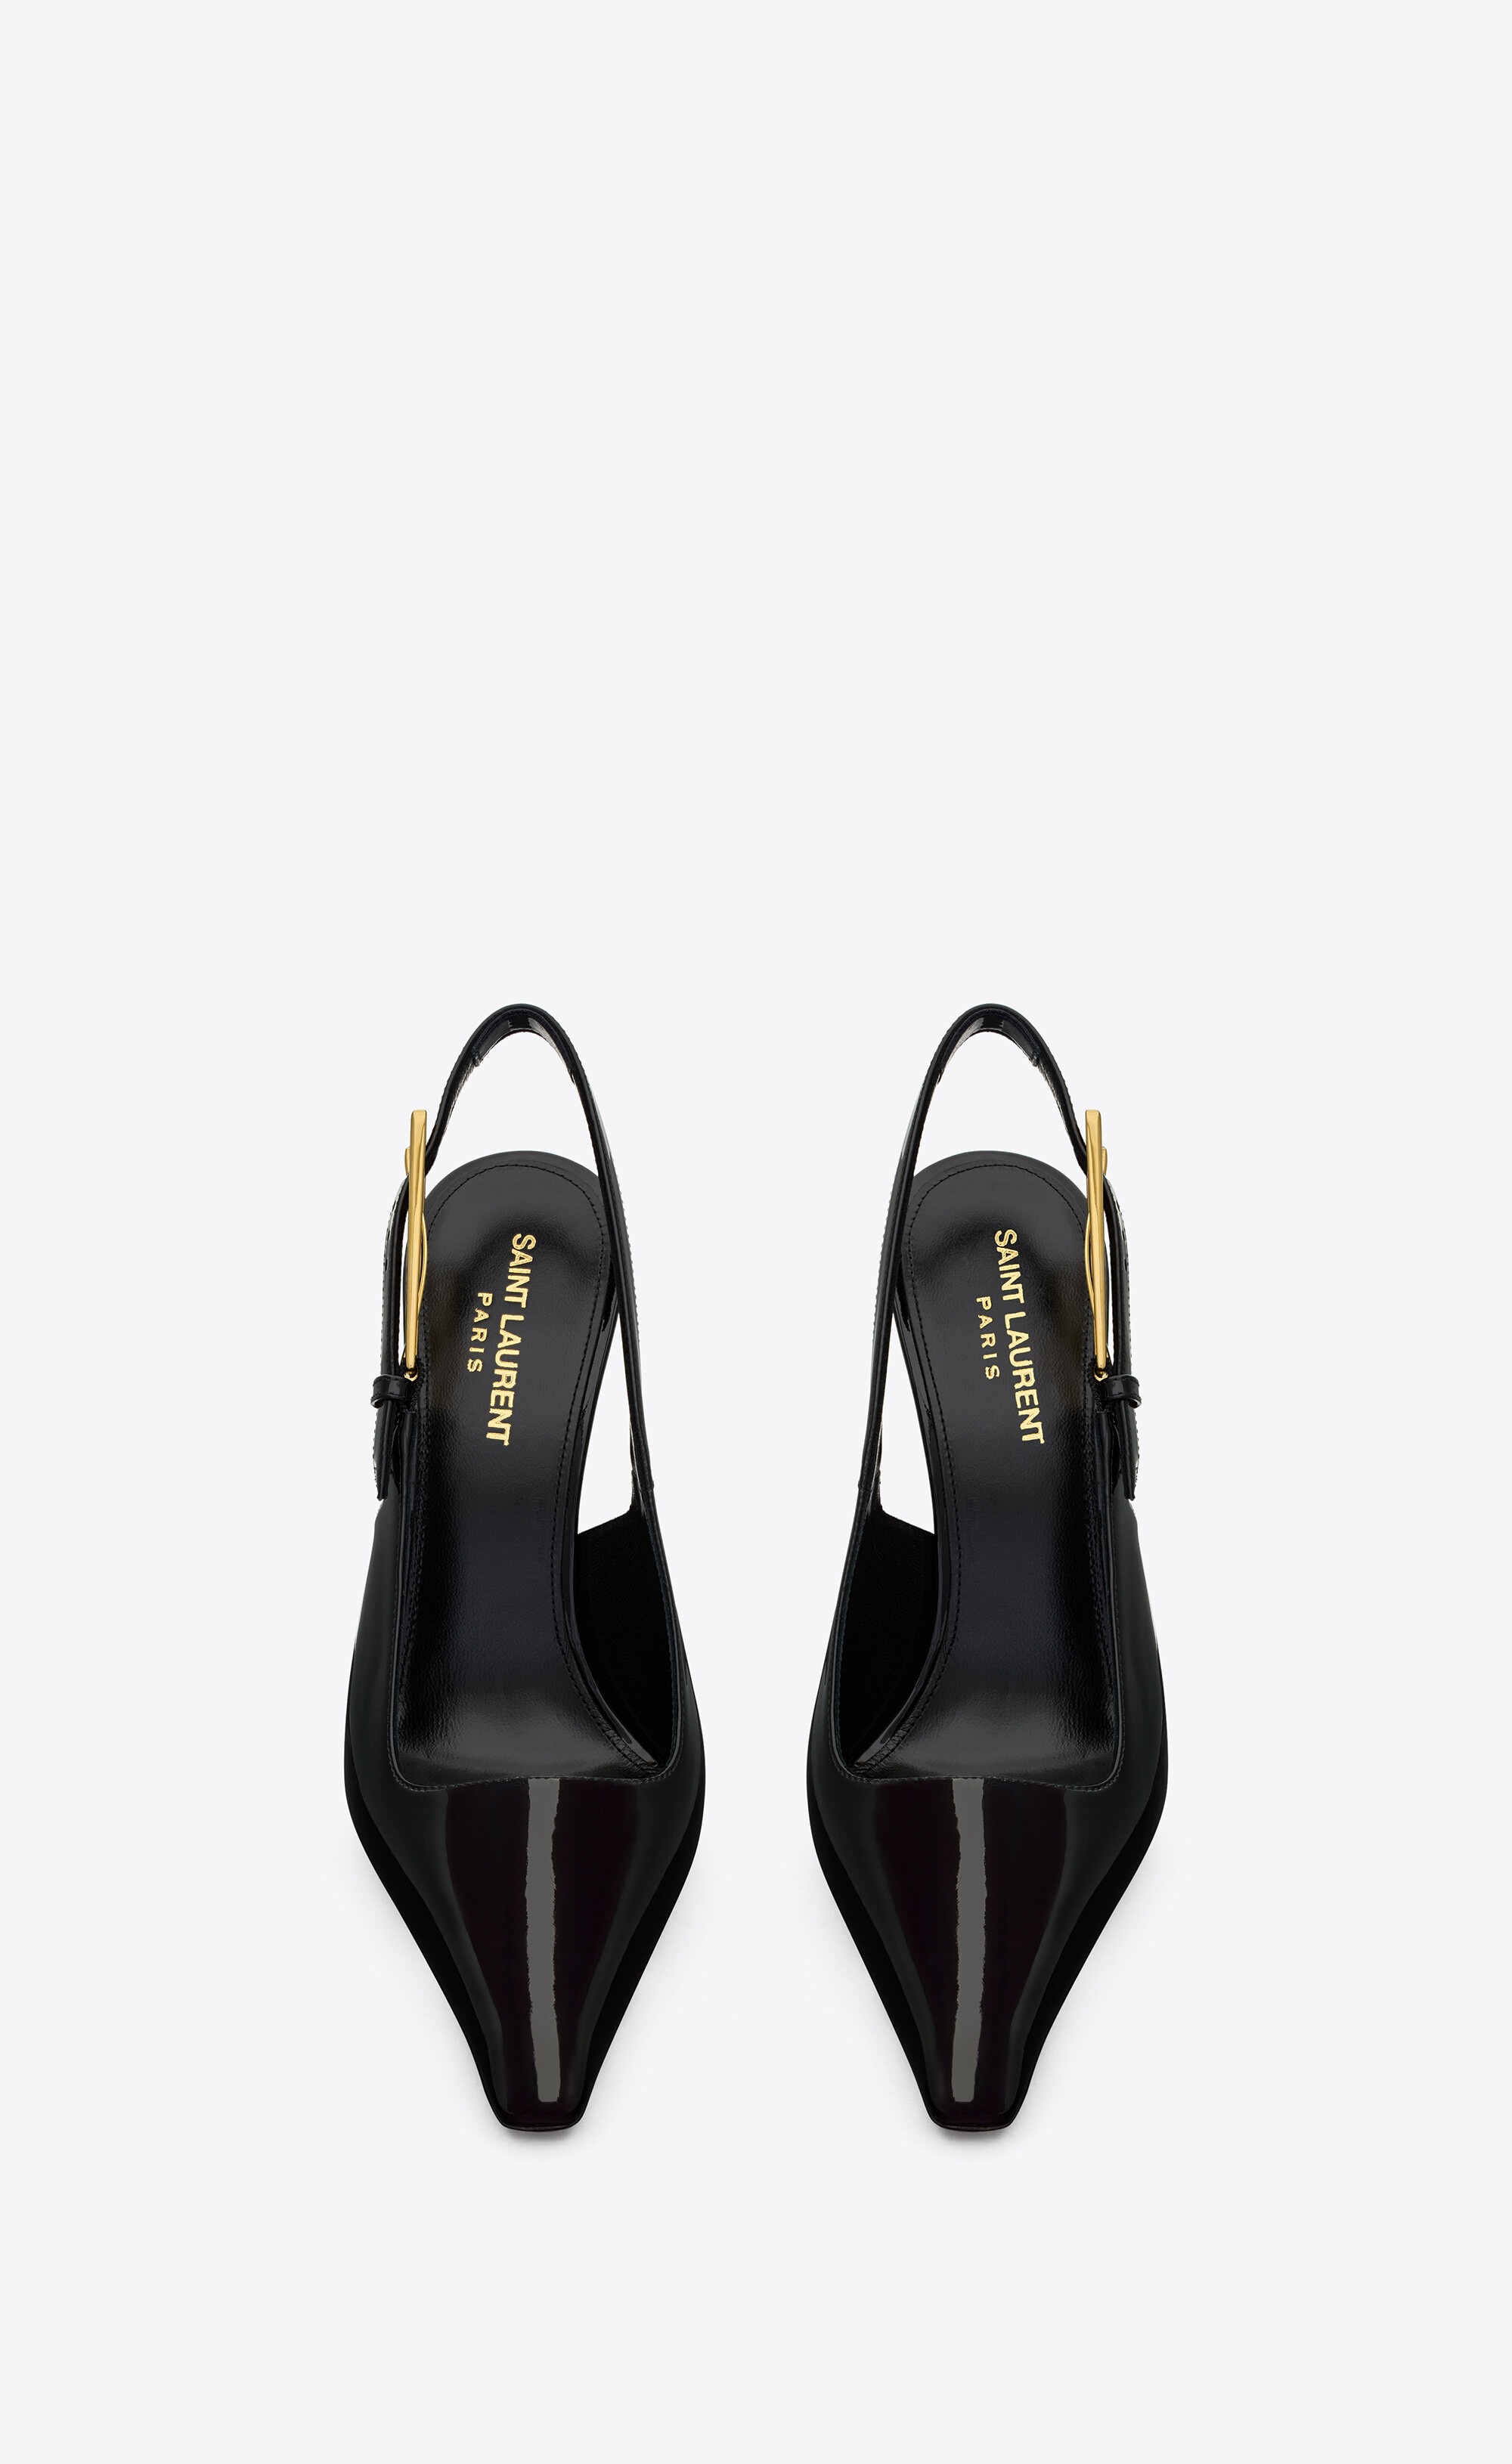 lee slingback pumps in patent leather - 2